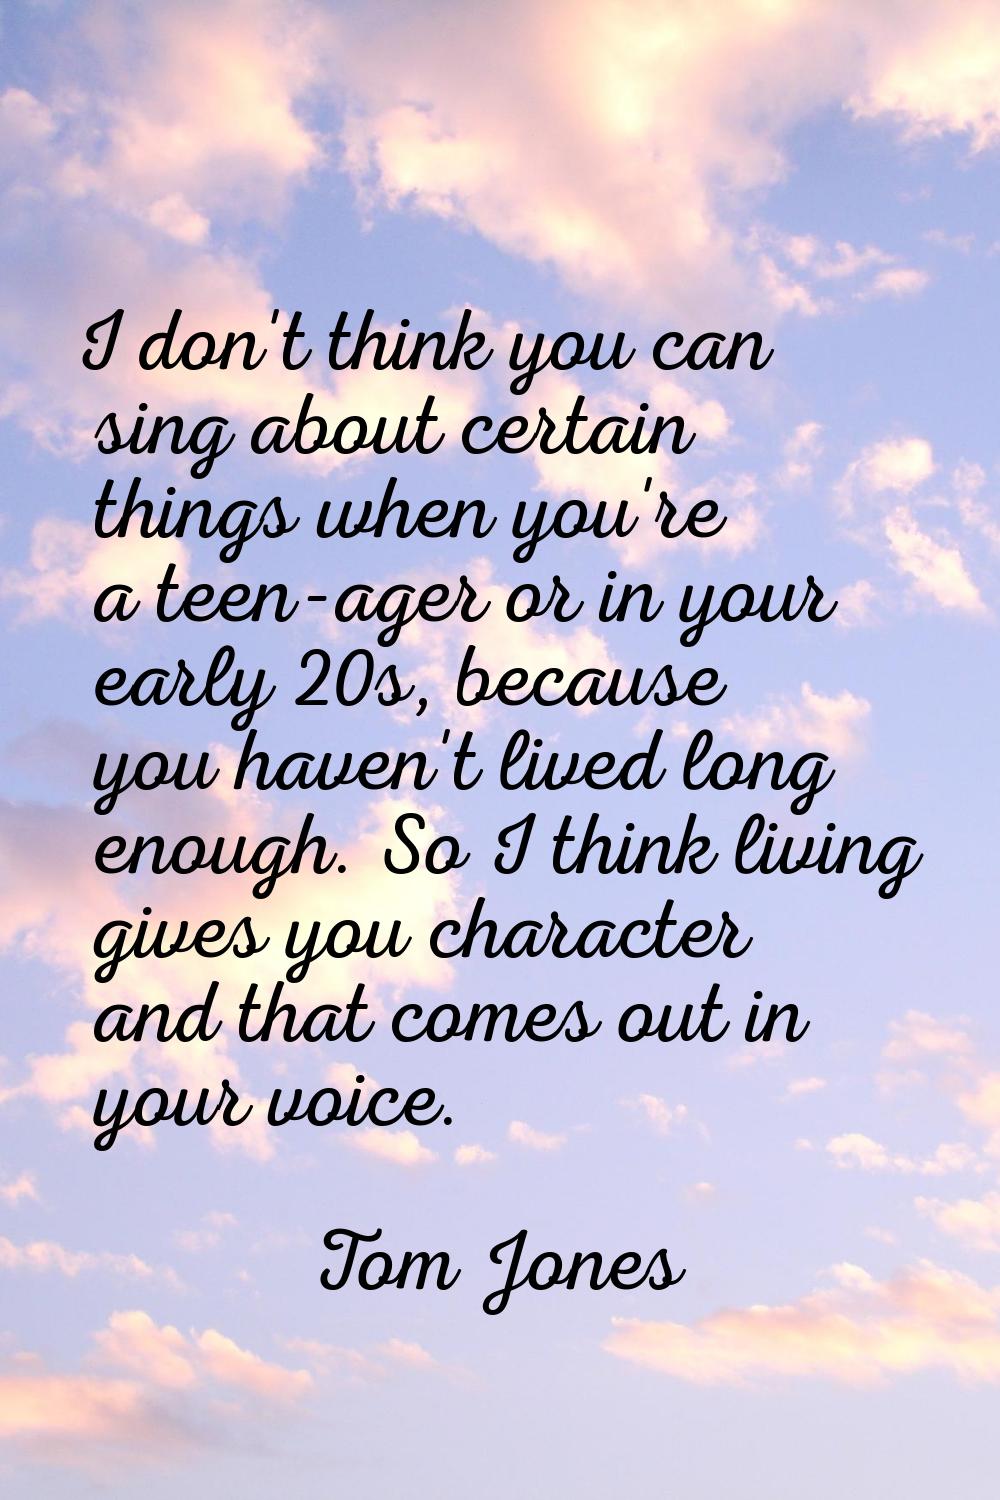 I don't think you can sing about certain things when you're a teen-ager or in your early 20s, becau